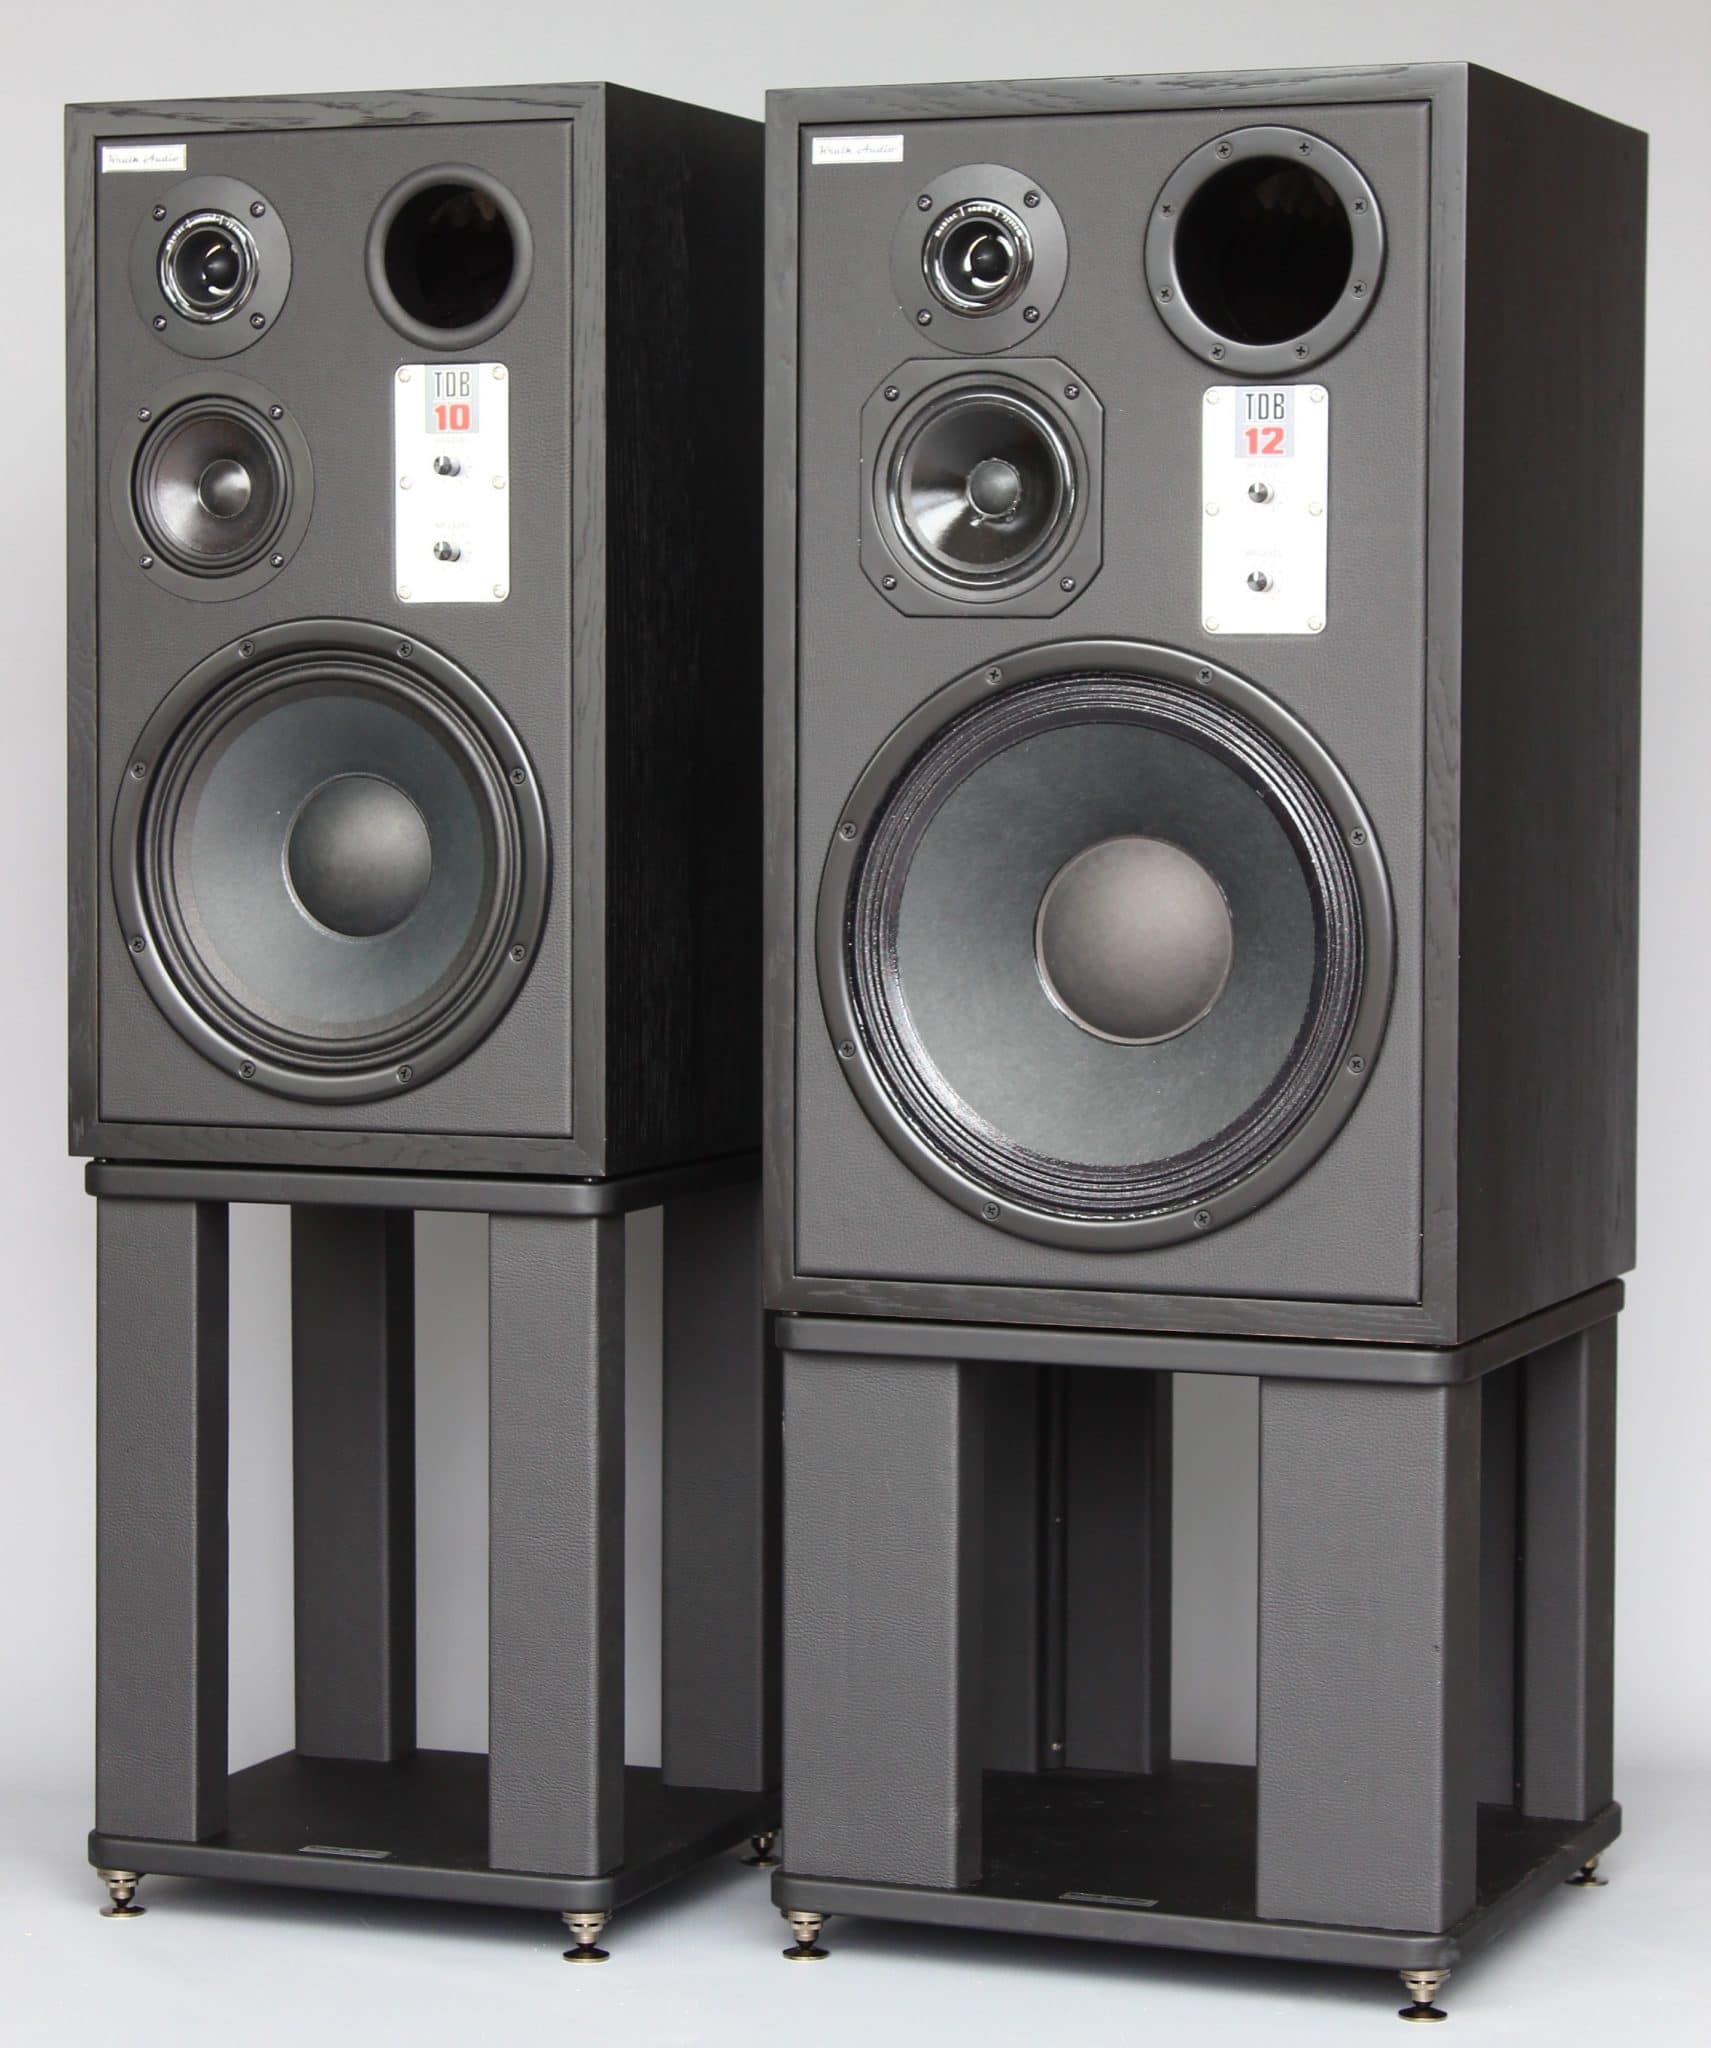 TDB Speakers Launched By Kralk